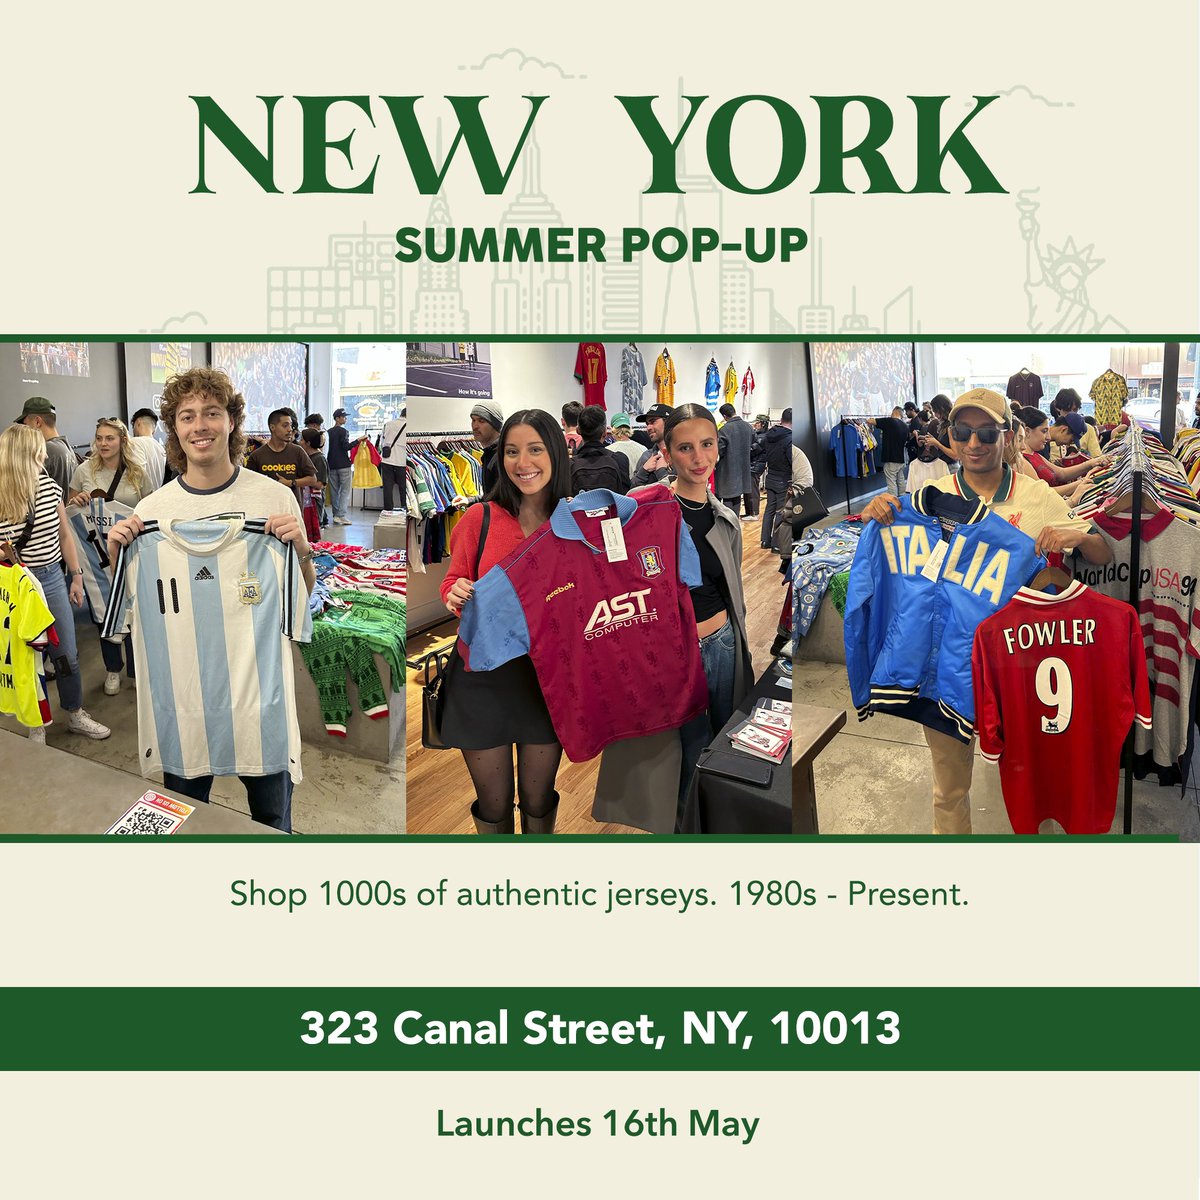 🗽 New York Summer Pop-Up Our New York Pop-Up store is back this Summer! Who will be heading down to see us? ⚽ Shop 1000s of authentic jerseys 🗓️ Launches 16th May 📍323 Canal Street, NY, 10013